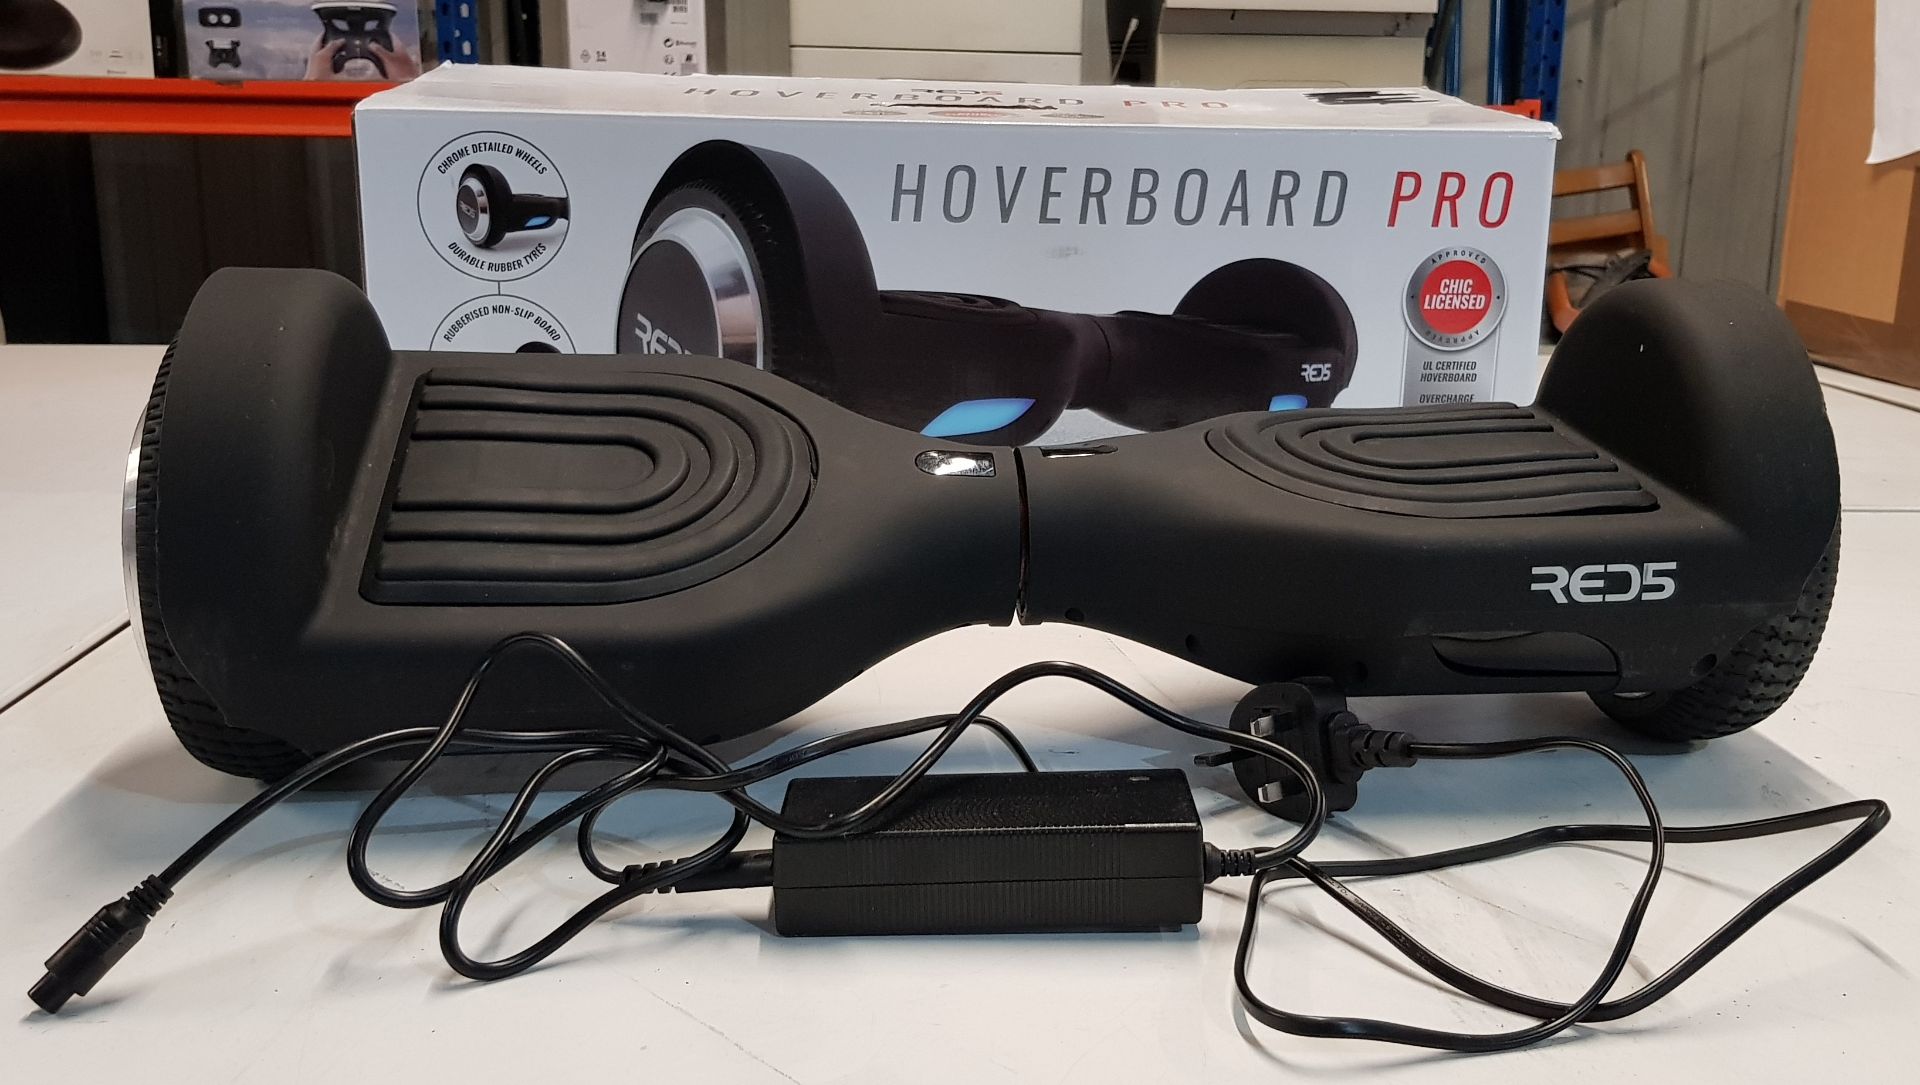 Red5 Hoverboard Pro (RRP £199). Top Speed Of 9 Km/H. Range Of Up To 5.5 Miles. Built-In Rechar... - Image 2 of 2